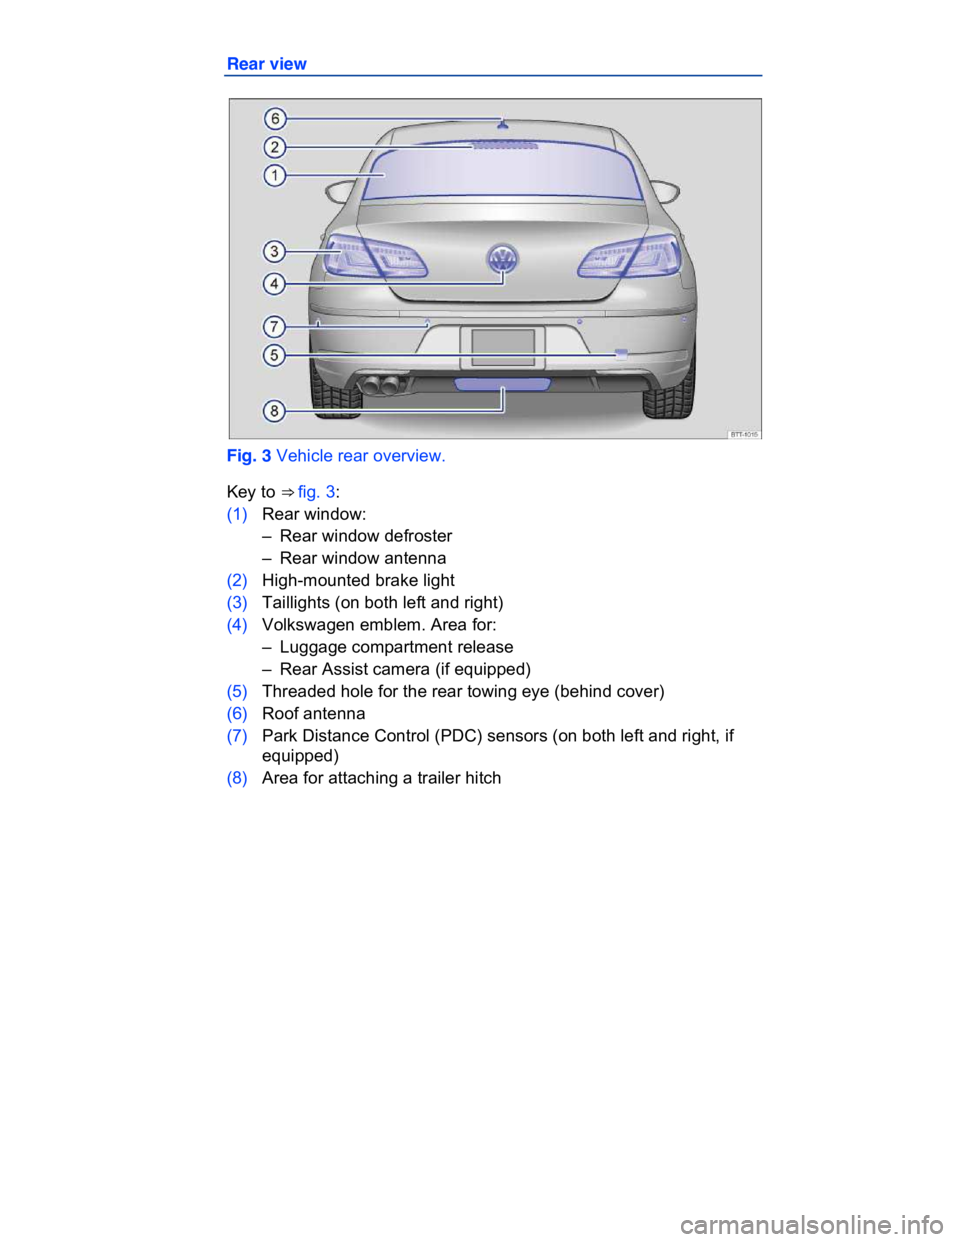 VOLKSWAGEN CC 2011  Owners Manual  
Rear view 
 
Fig. 3 Vehicle rear overview. 
Key to ⇒ fig. 3: 
(1) Rear window: 
–  Rear window defroster  
–  Rear window antenna  
(2) High-mounted brake light 
(3) Taillights (on both left